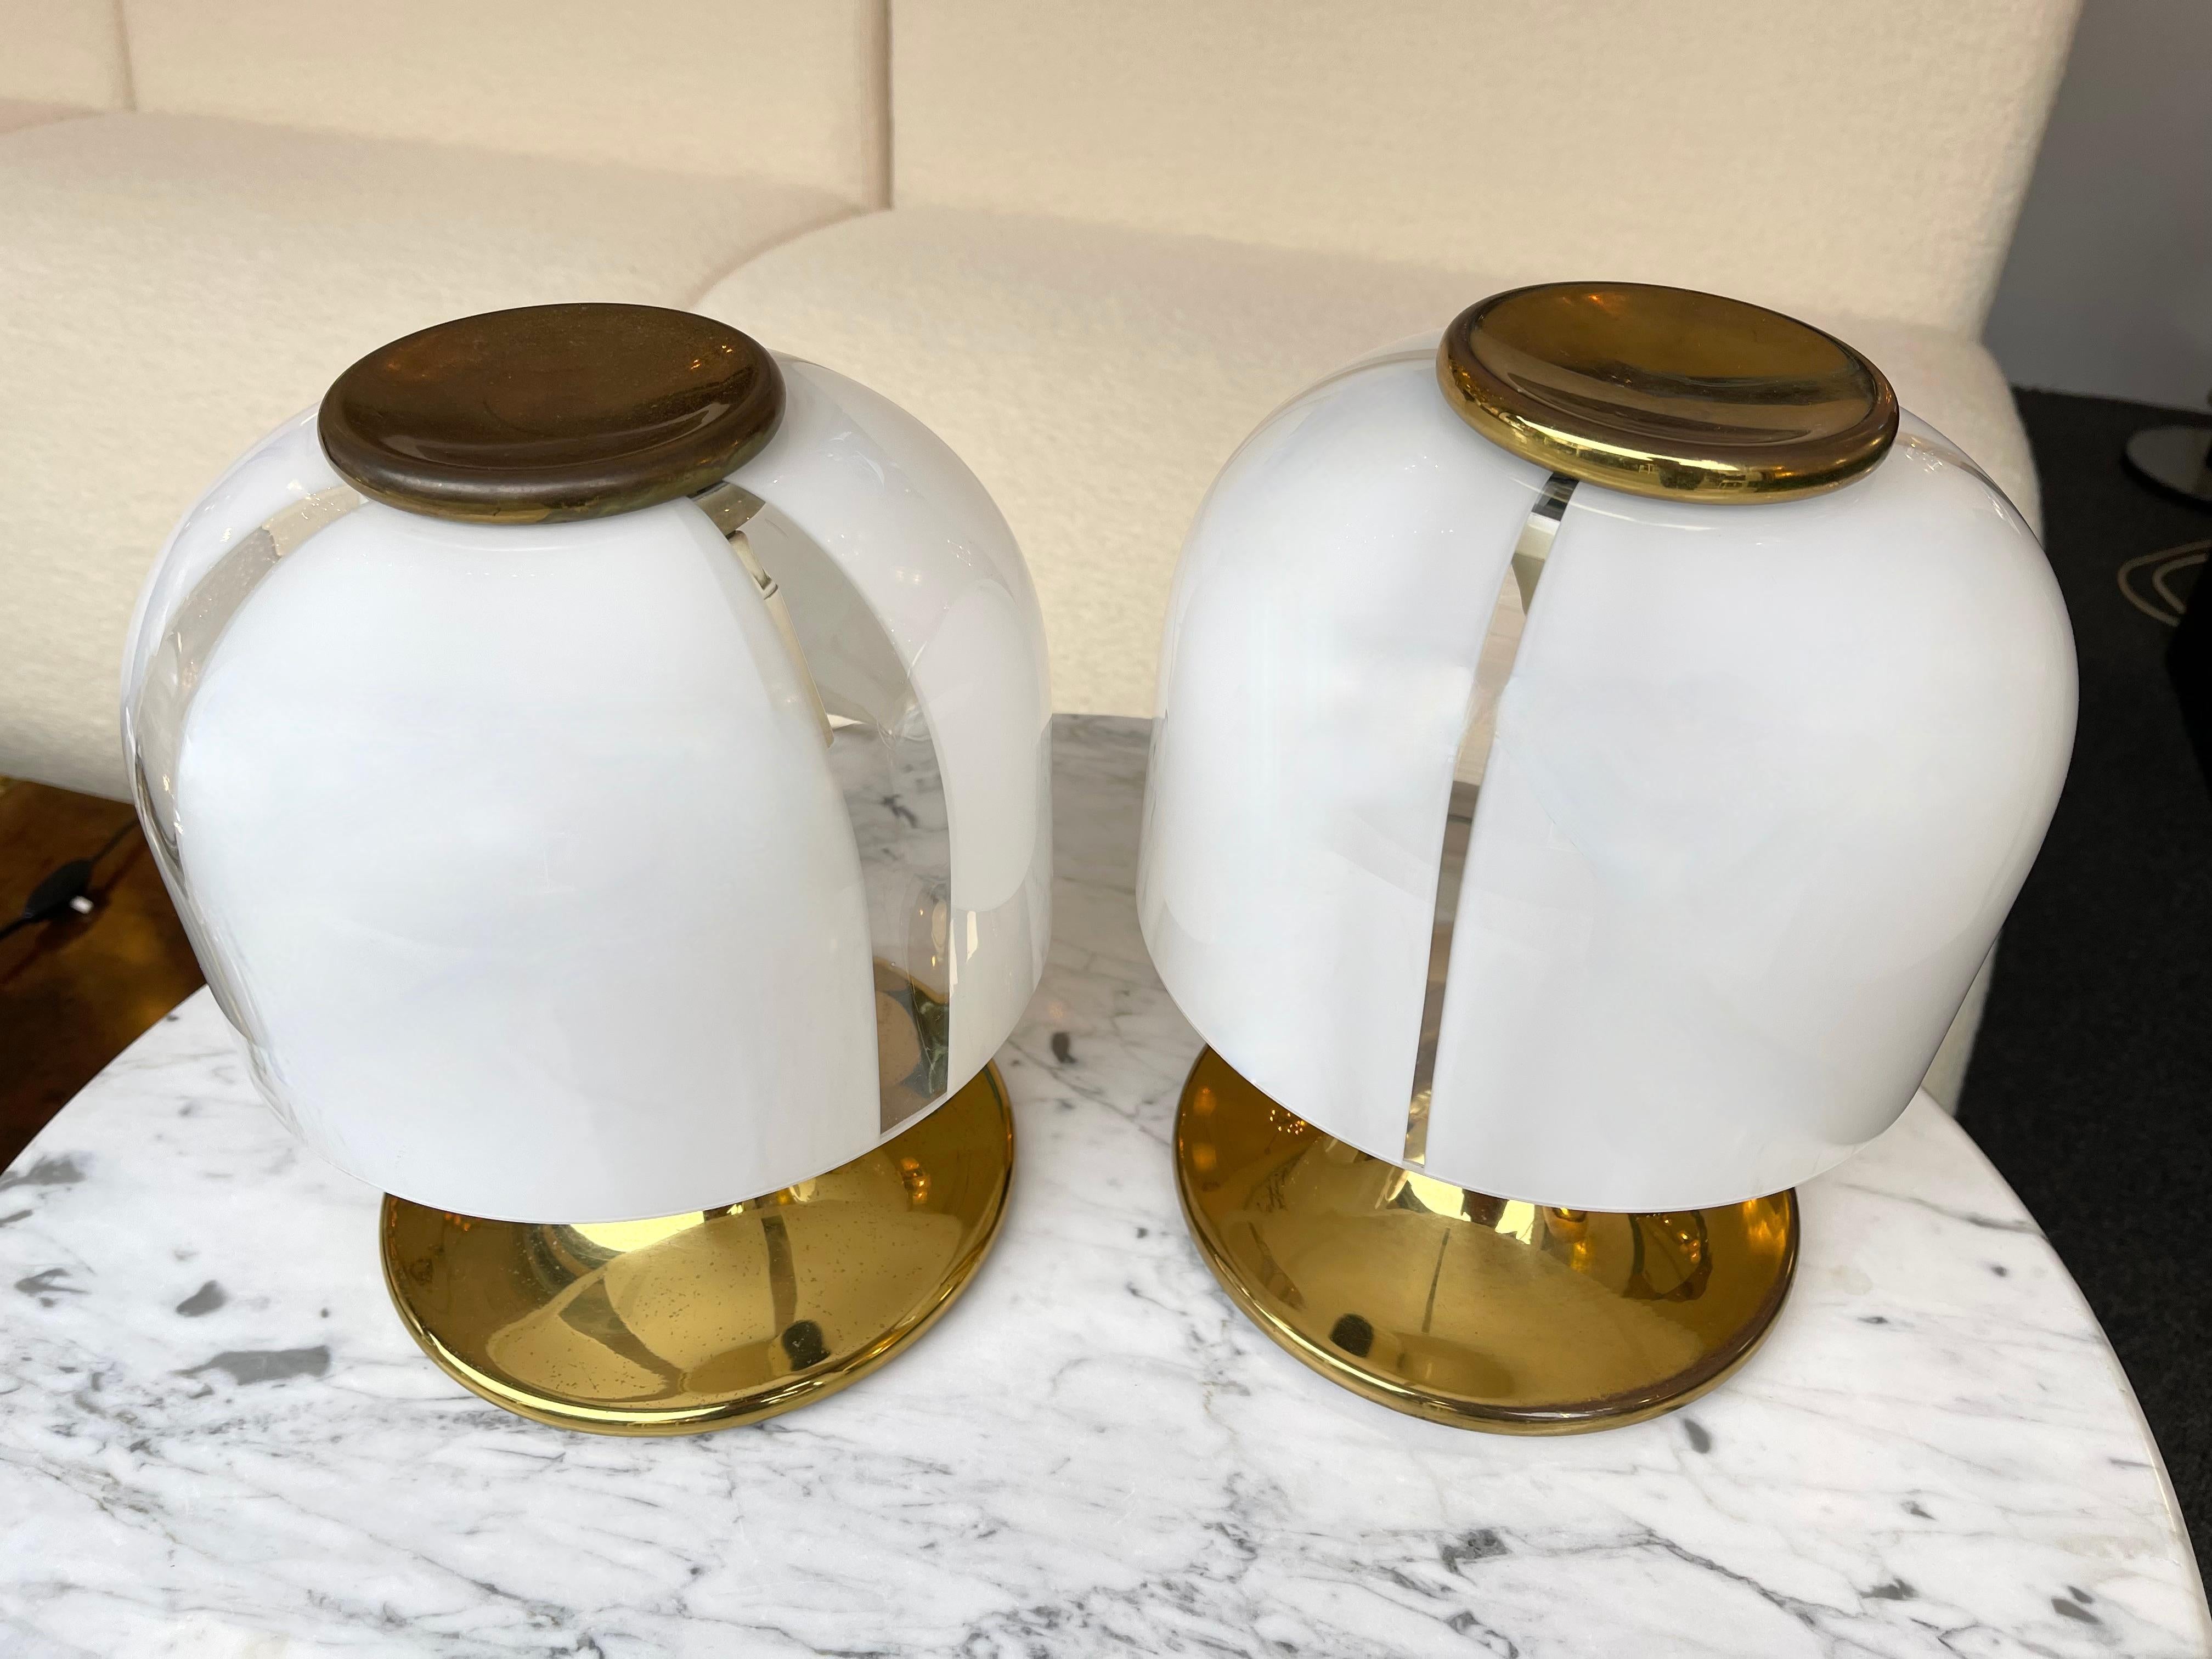 Pair of mushroom table or bedside lamps in brass and murano glass by F. Fabbian. The small version of the model. Famous design like Mazzega, Venini, Vistosi, La Murrina, Poliarte.